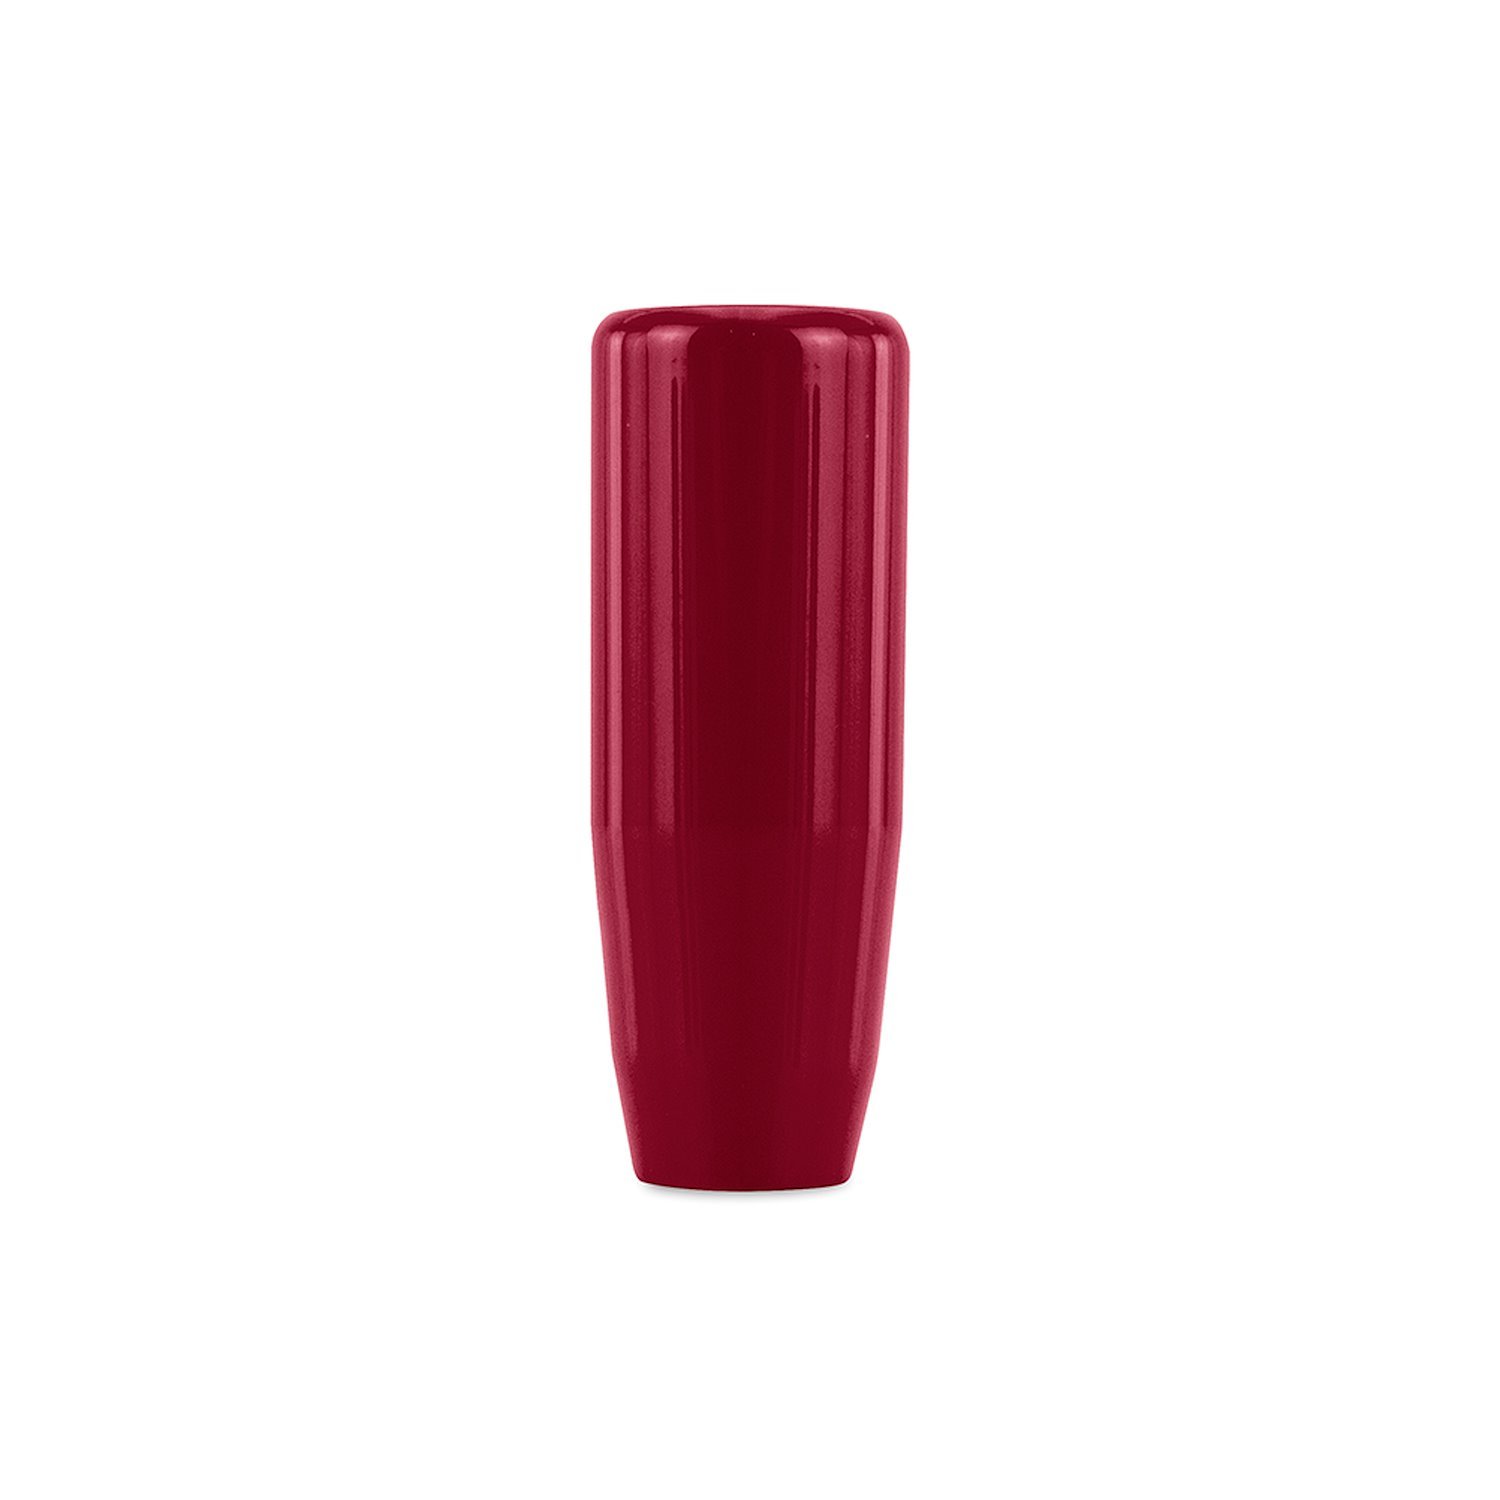 Weighted Shift Knob [Red]